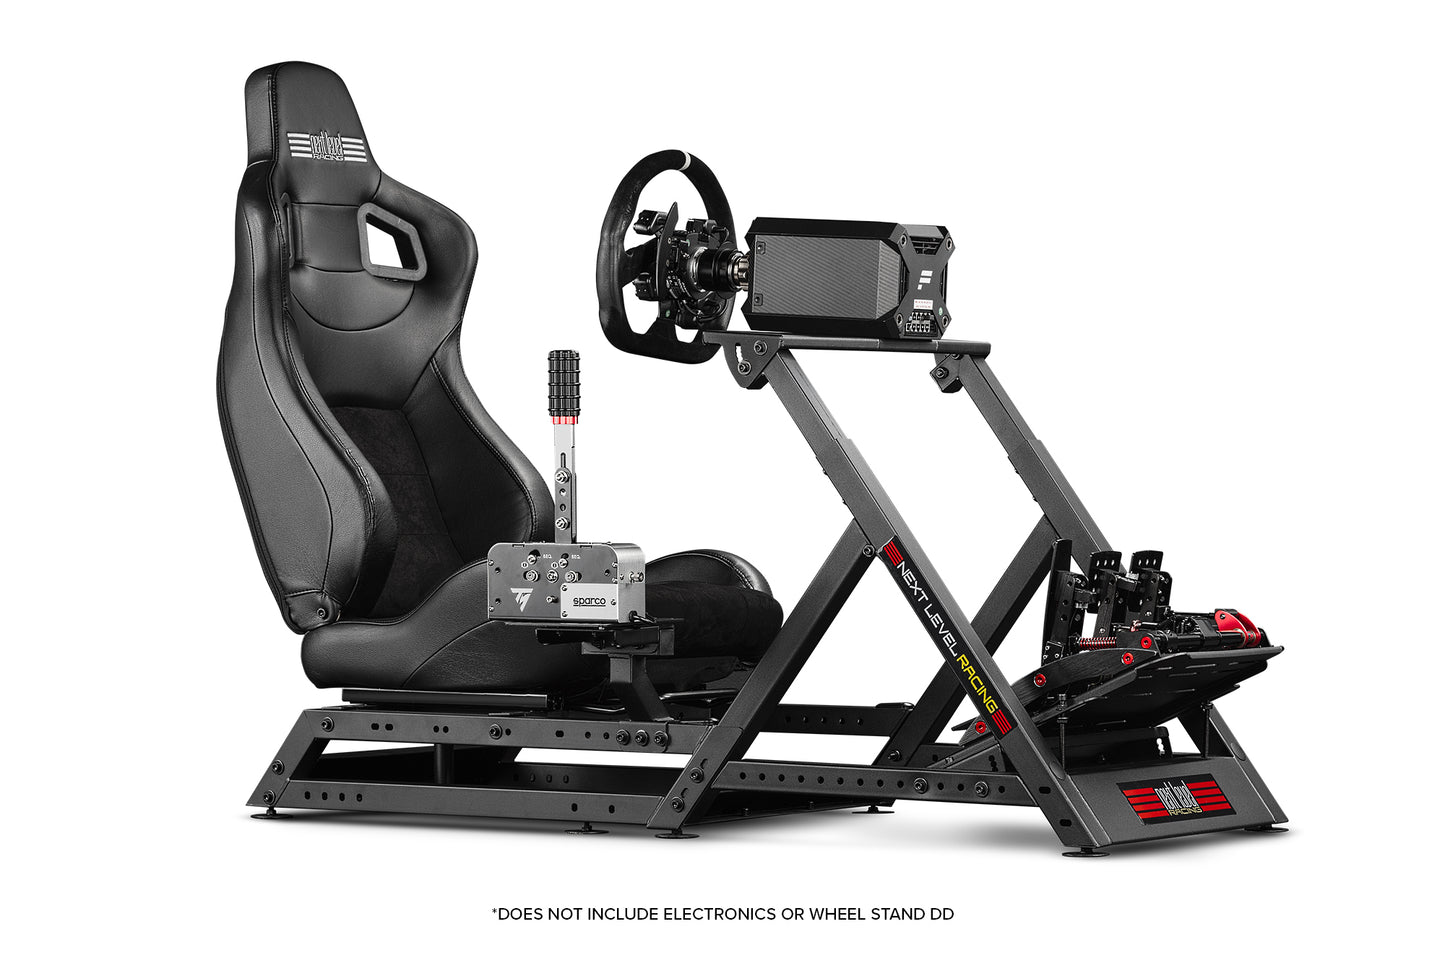 Next Level Racing GT Seat Add-on